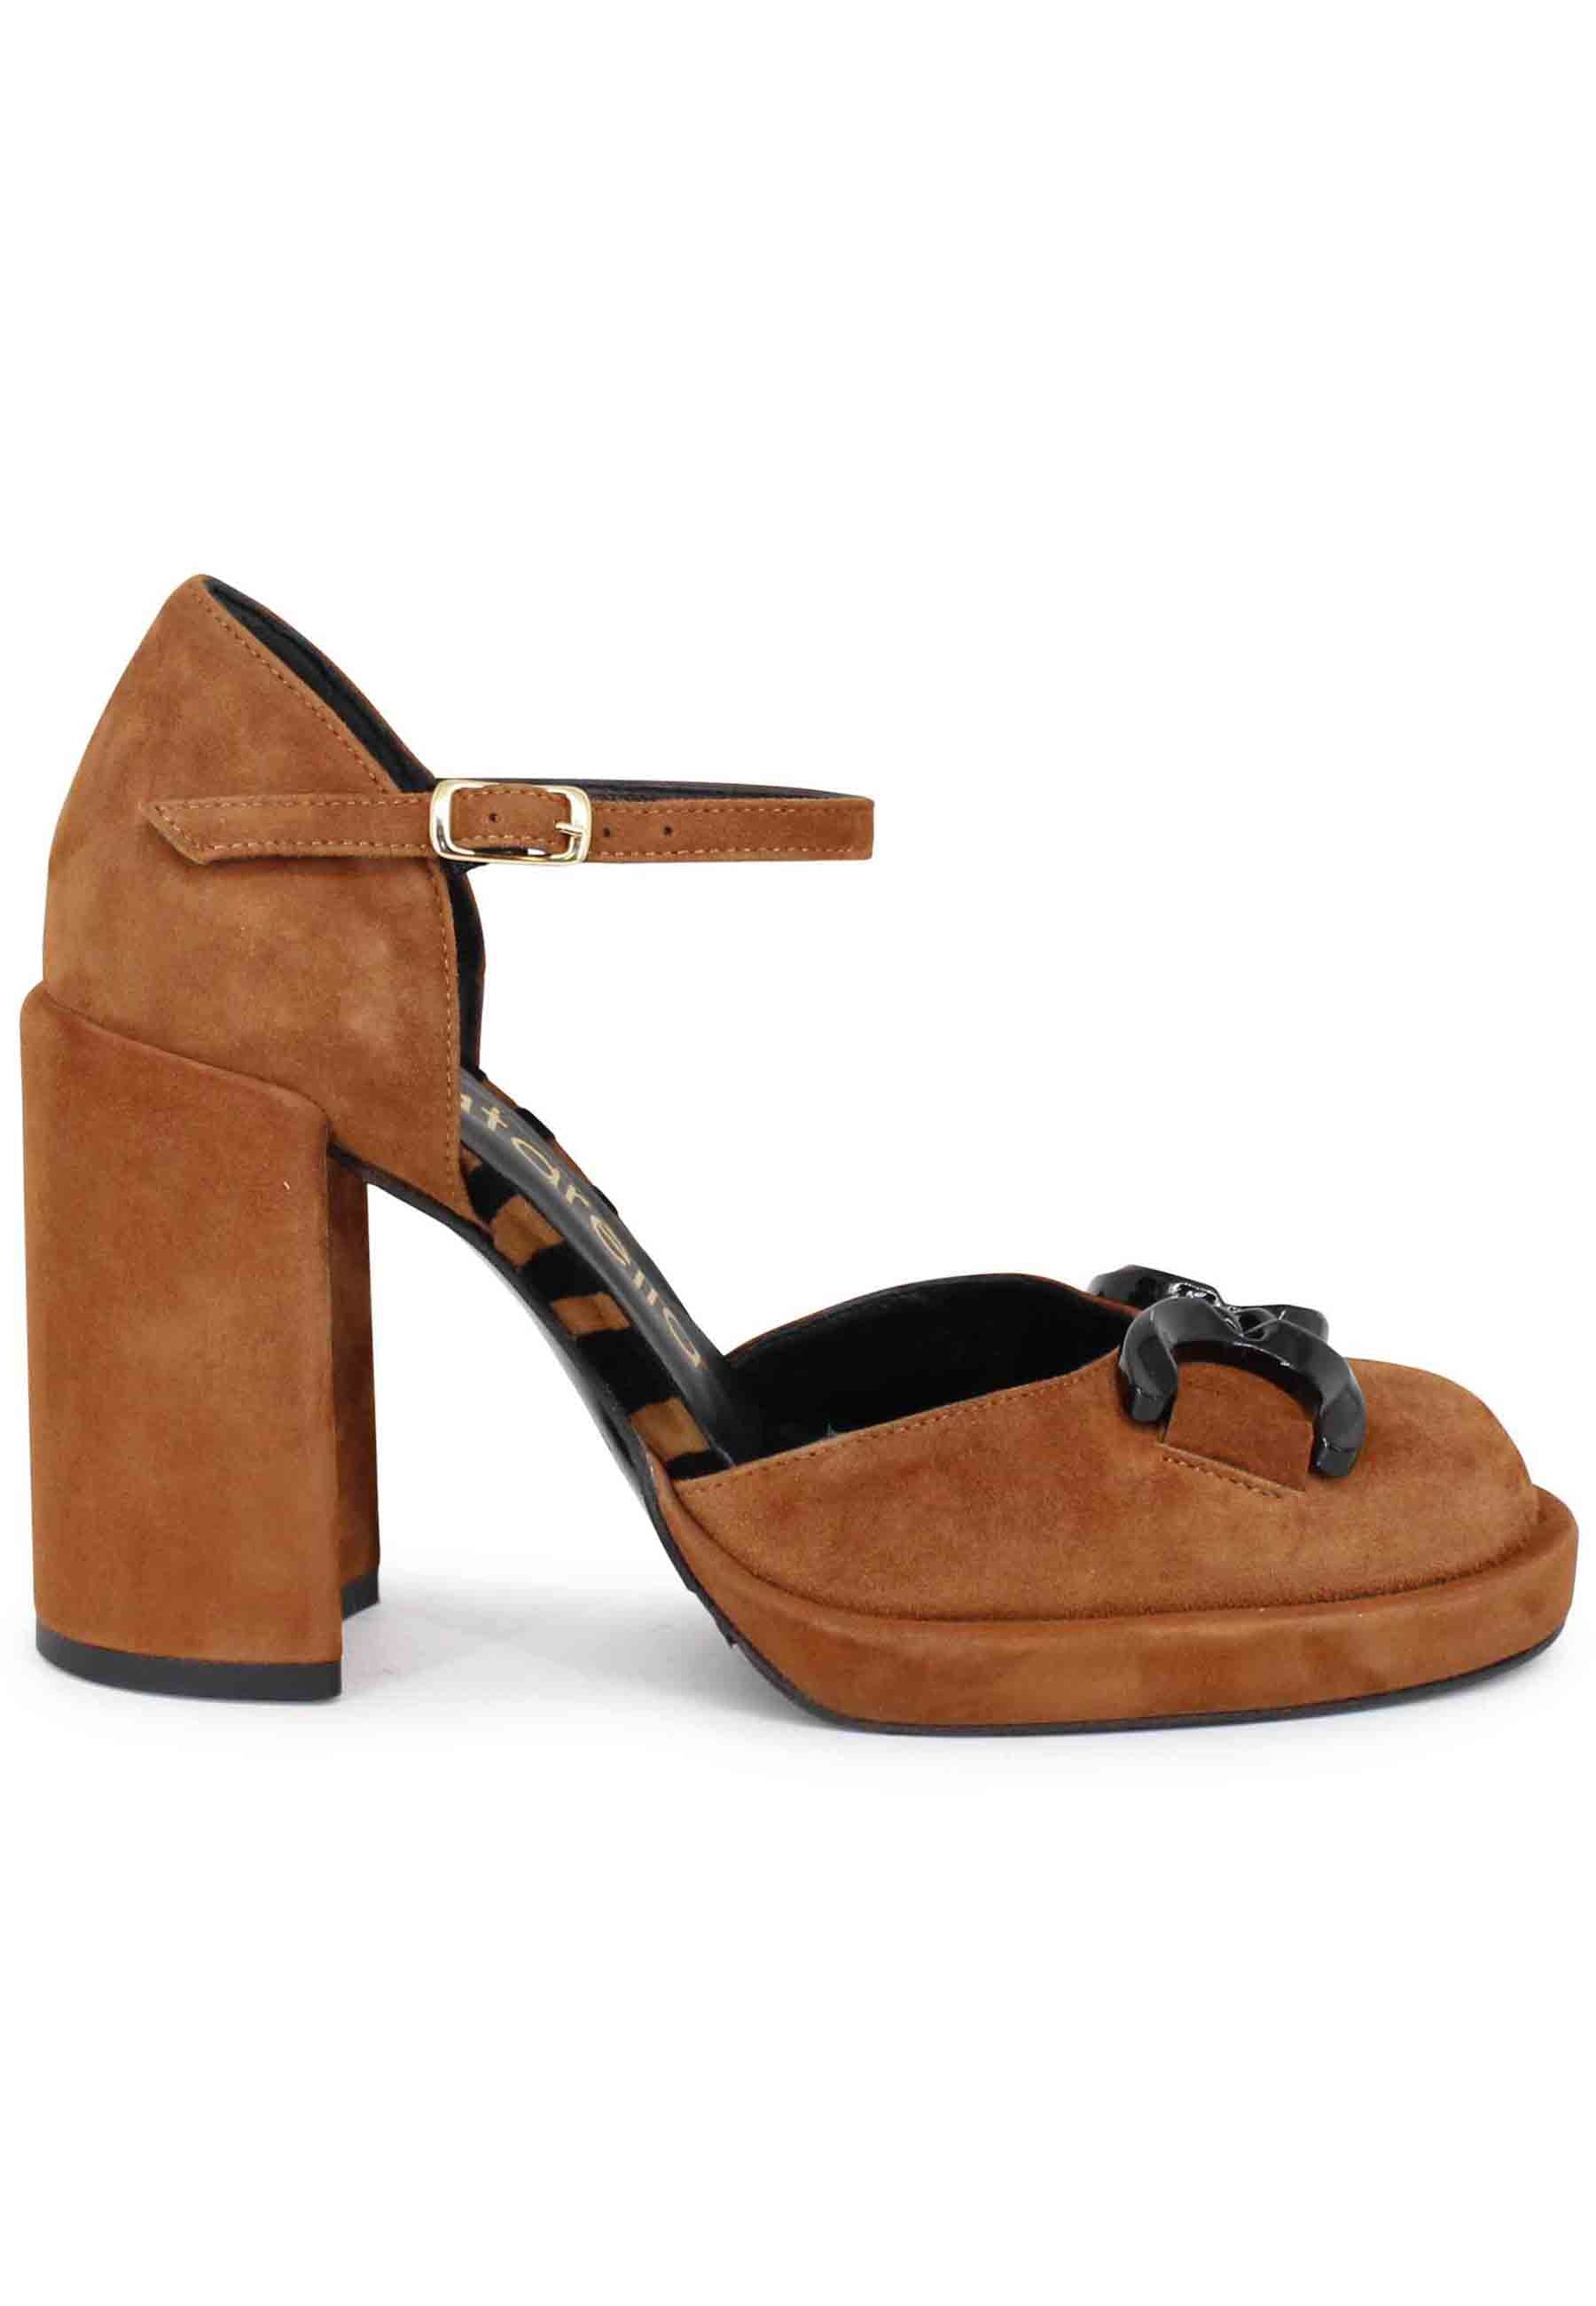 Women's pumps in leather suede with high heel and strap